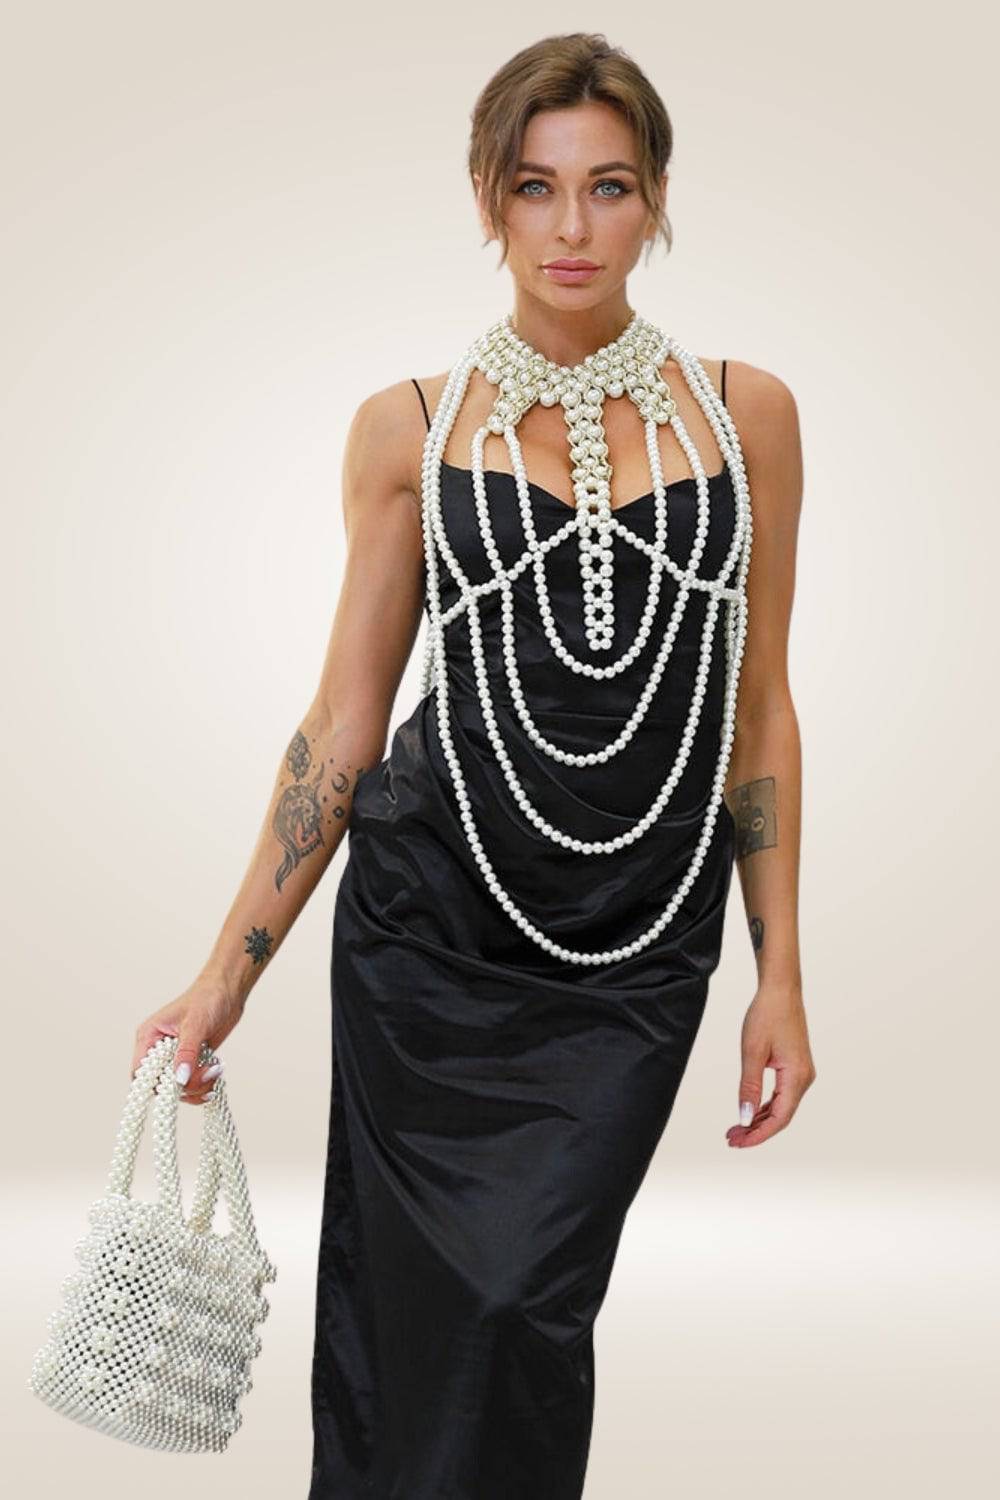 Pearl Body Chain Round Layered Long Necklaces - TGC Boutique - Body Necklace